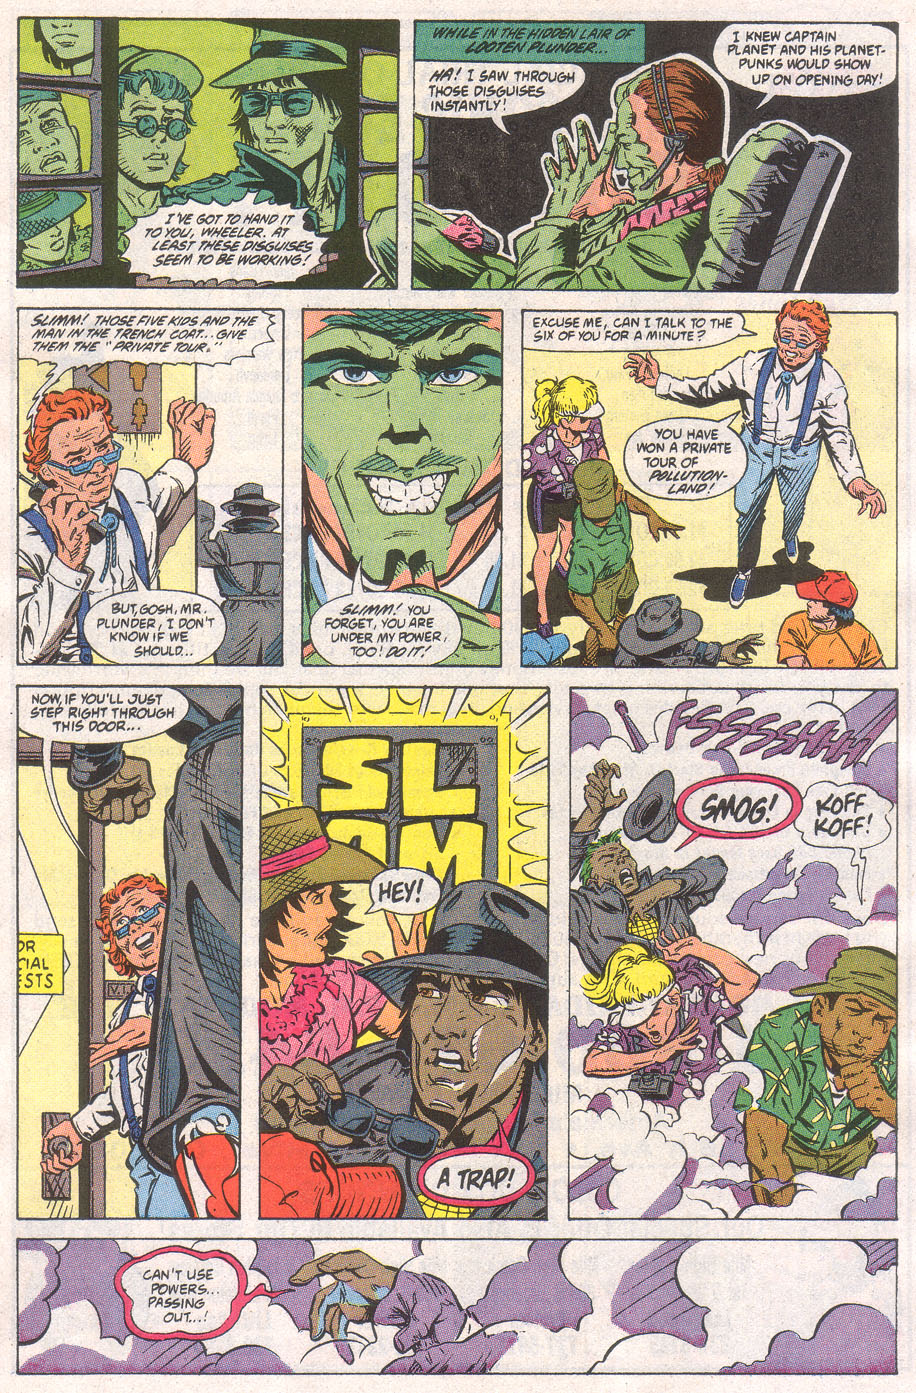 Captain Planet and the Planeteers 5 Page 11